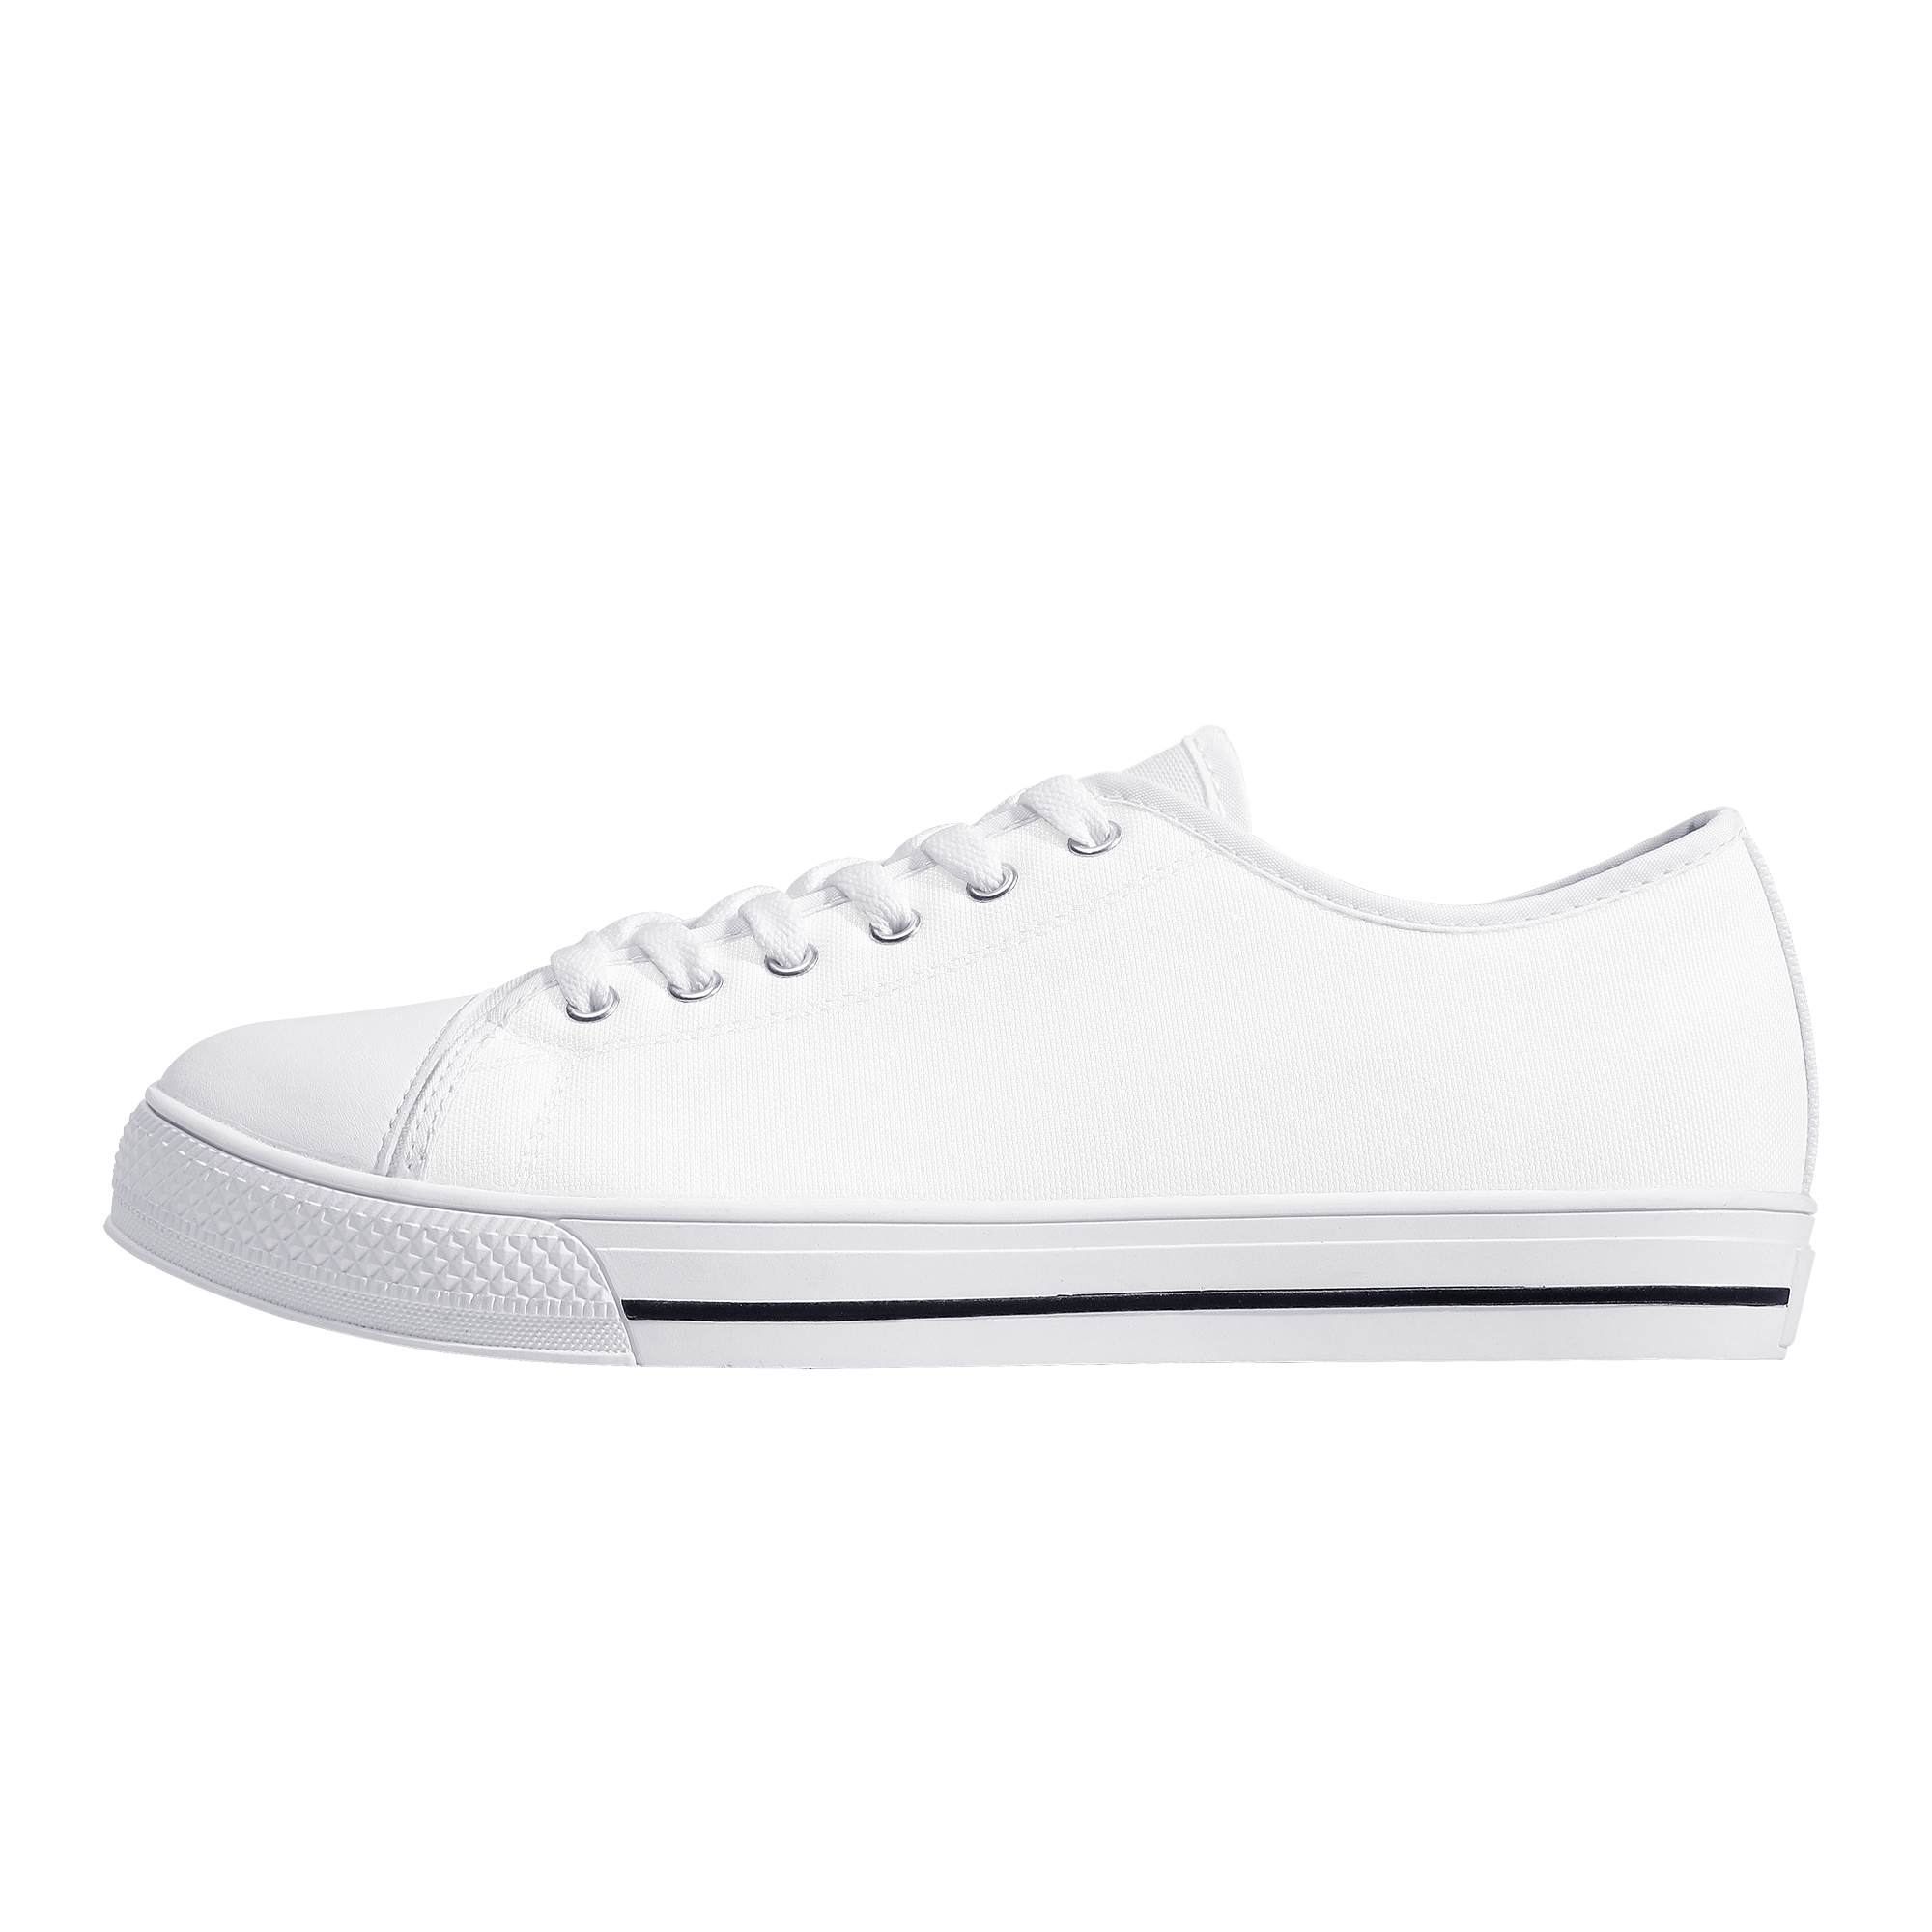 Customizable Low-Top Canvas Shoes With Customized Tongue - White - Shoe Zero